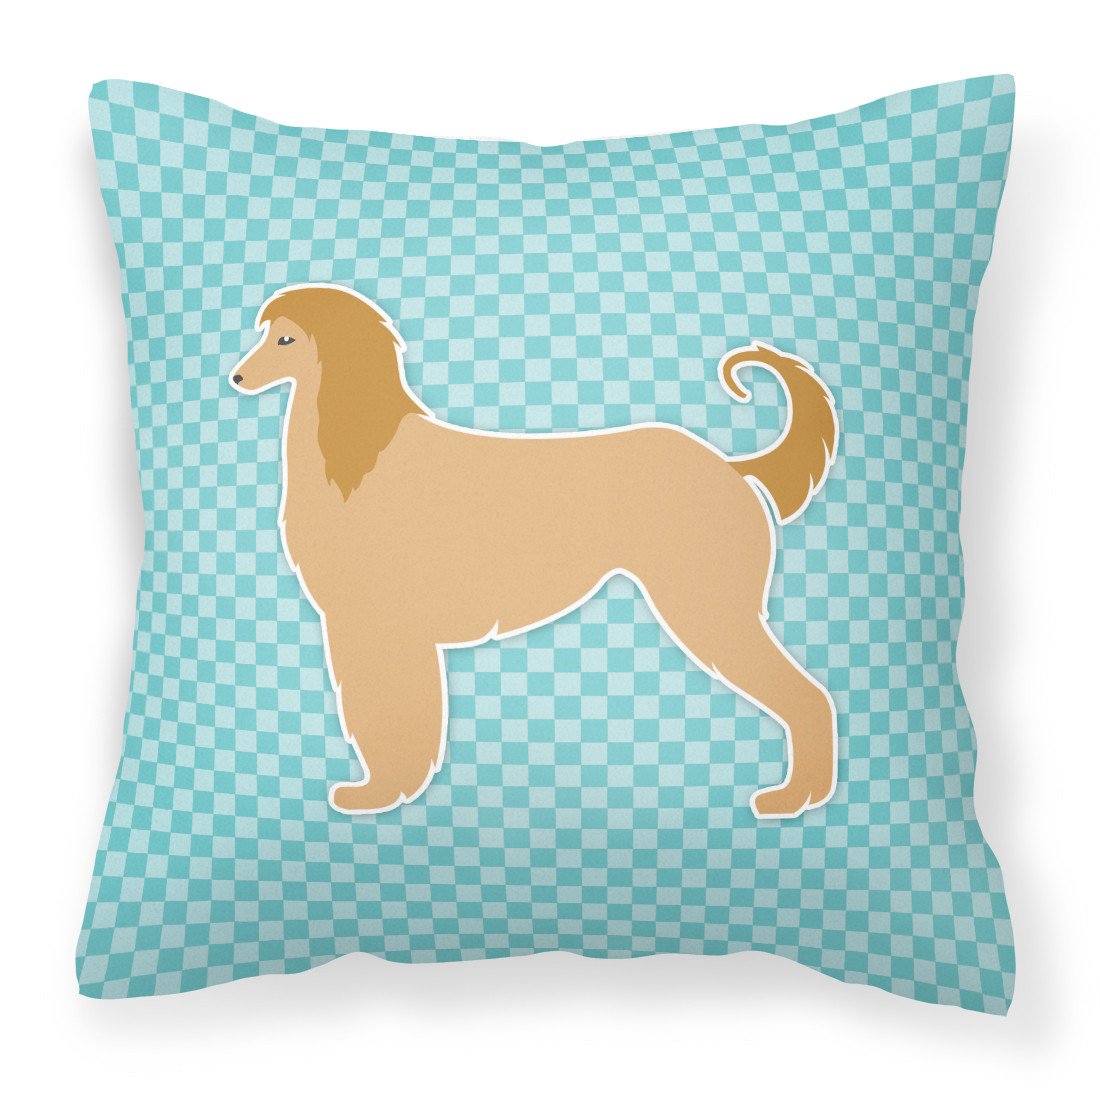 Afghan Hound  Checkerboard Blue Fabric Decorative Pillow BB3706PW1818 by Caroline's Treasures